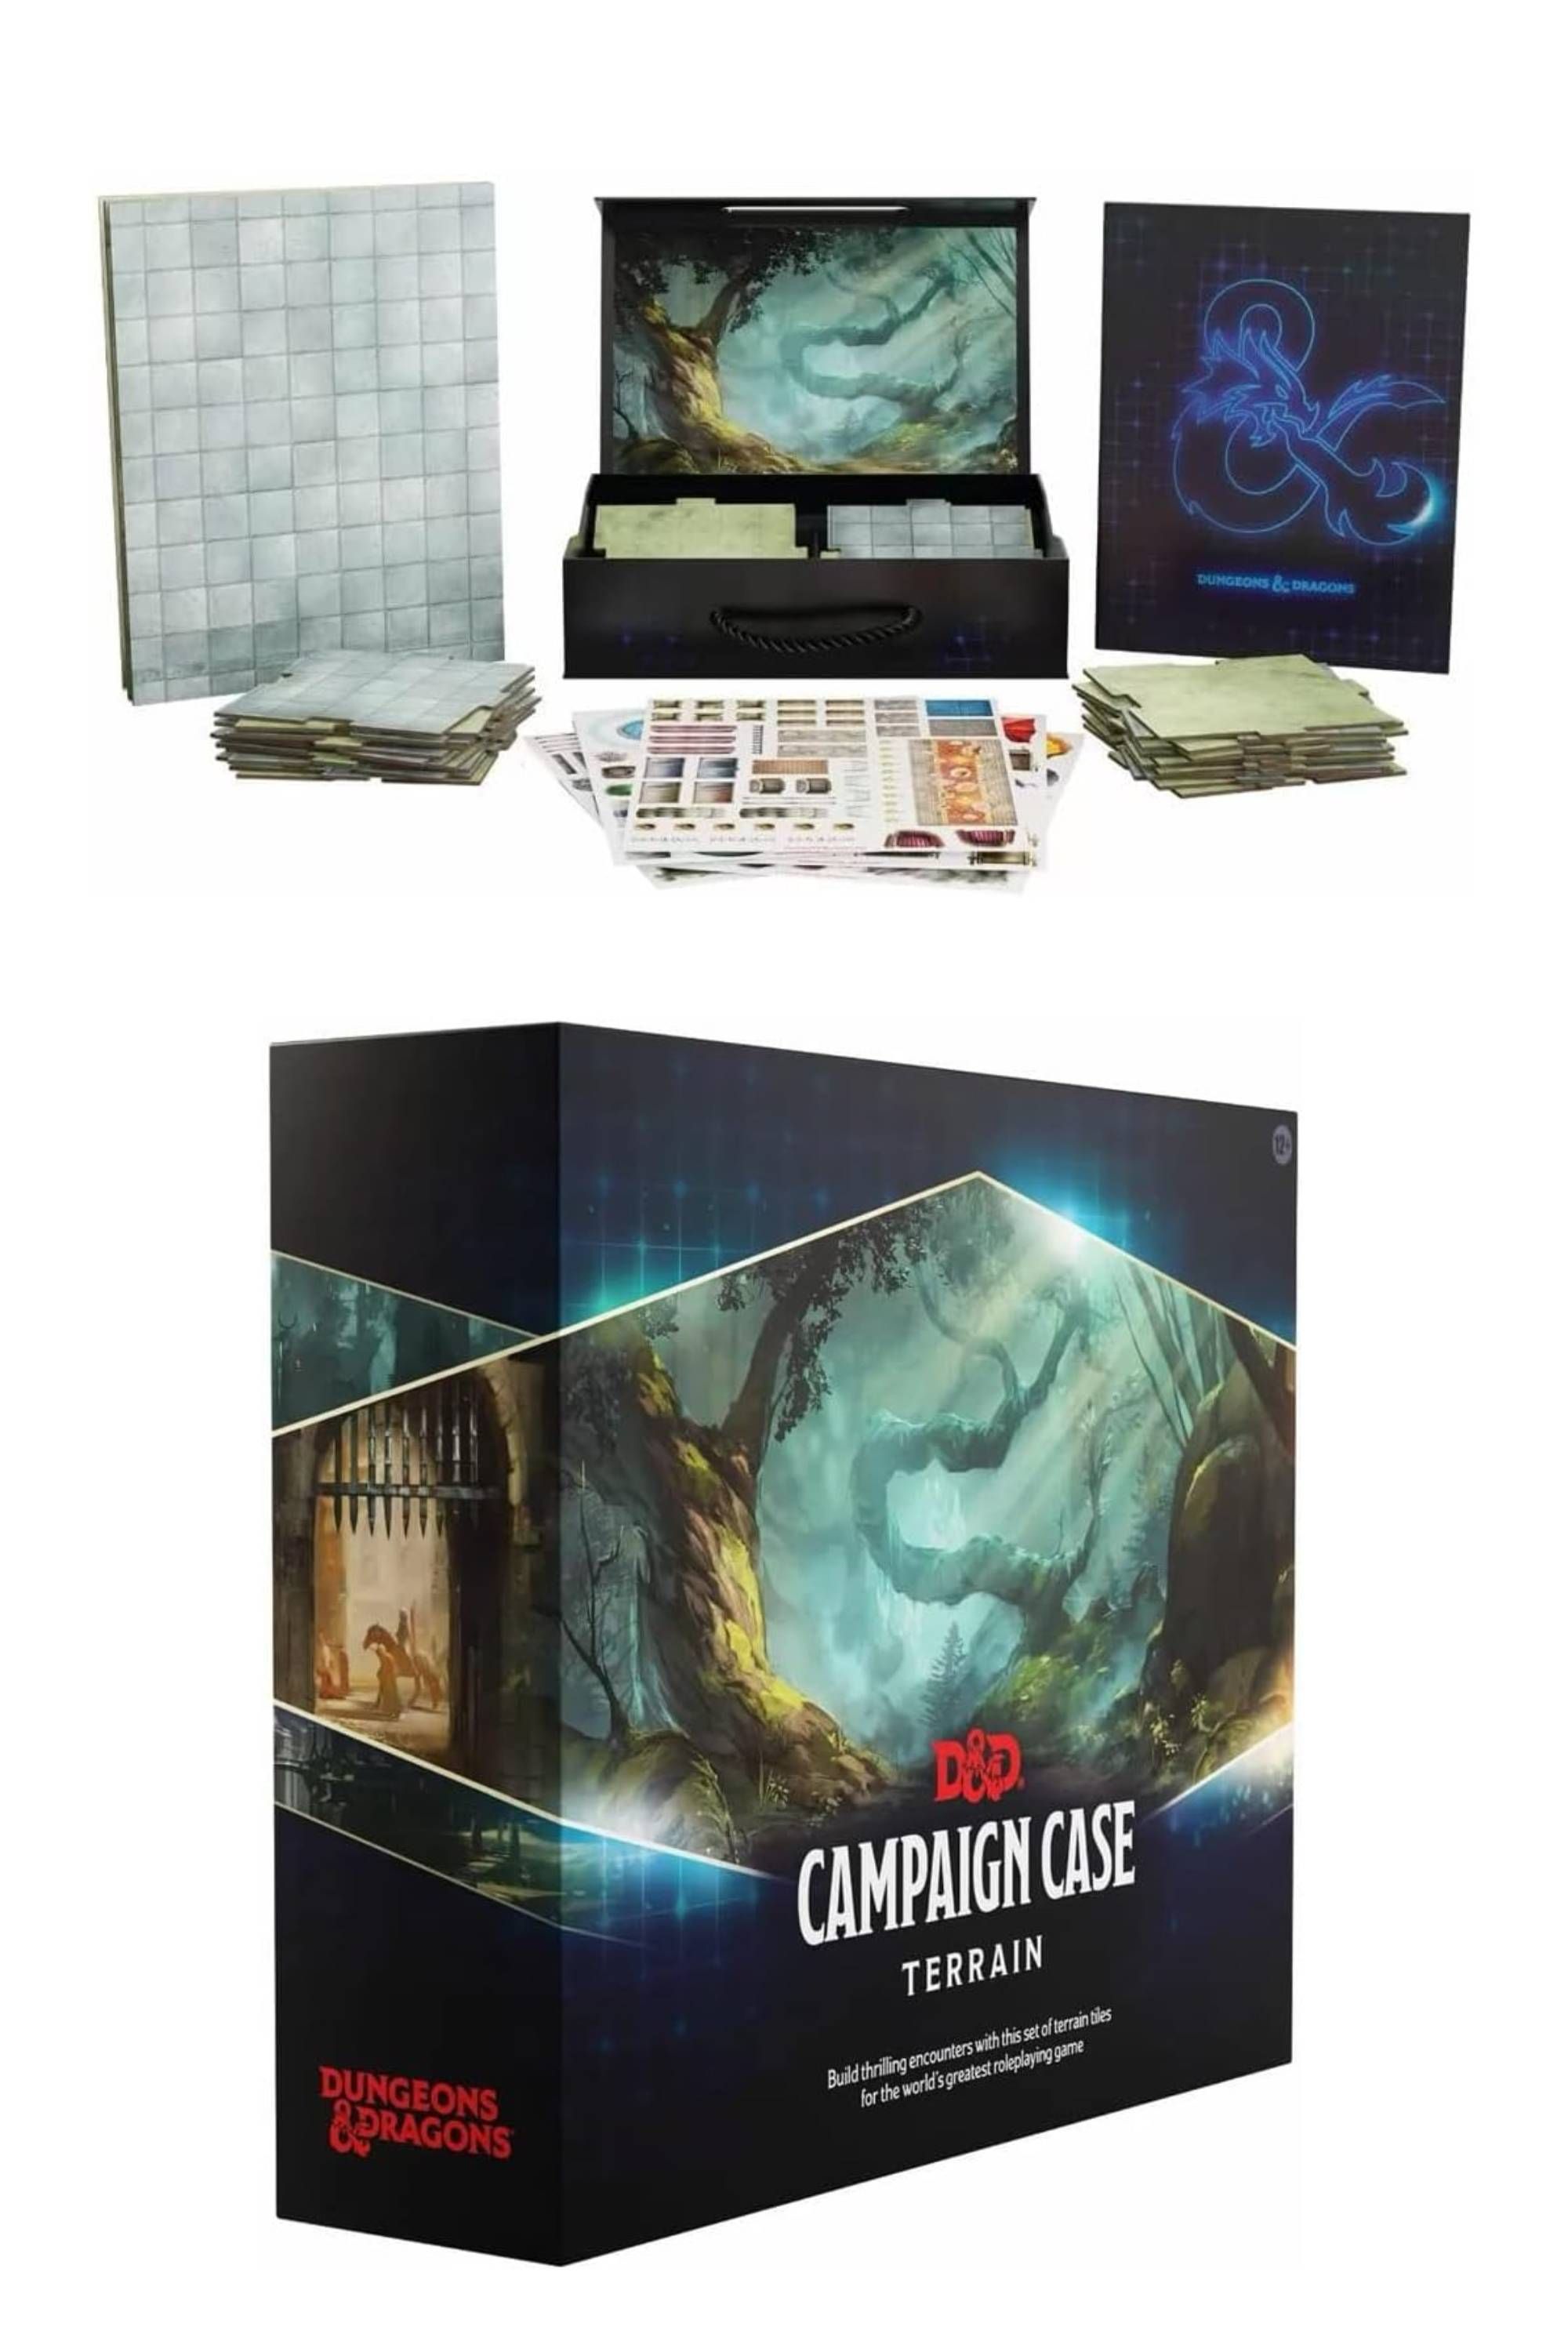 Dungeons & Dragons Campaign Case - Terrain